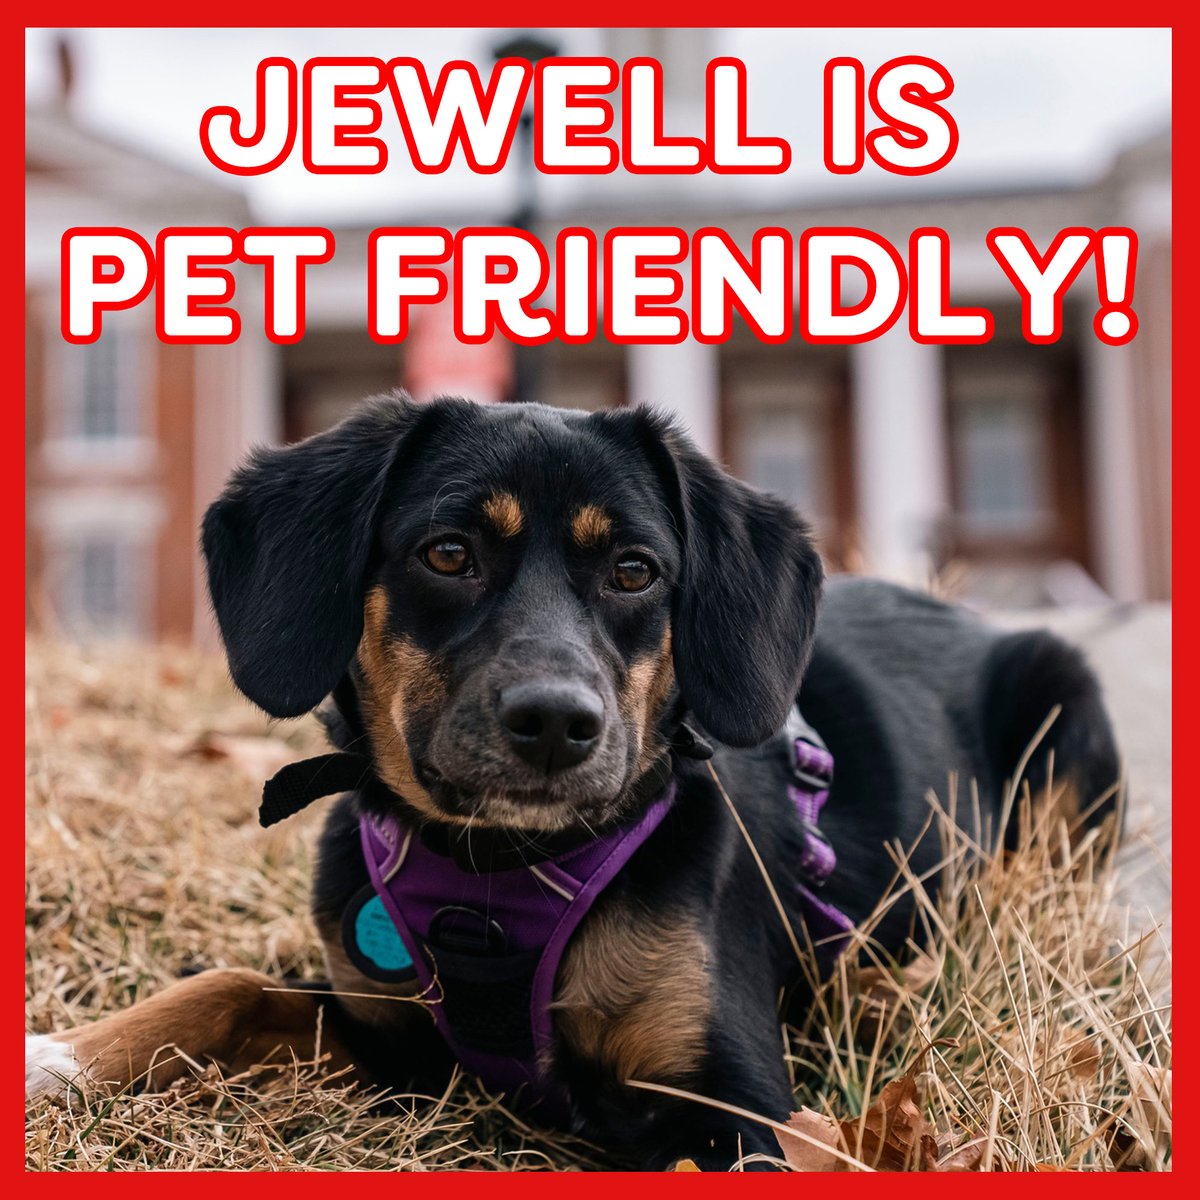 At Jewell, it's #nationalpetday EVERY DAY! We're a pet-friendly campus because we know a day away from your furry or finned friend is RUFF!